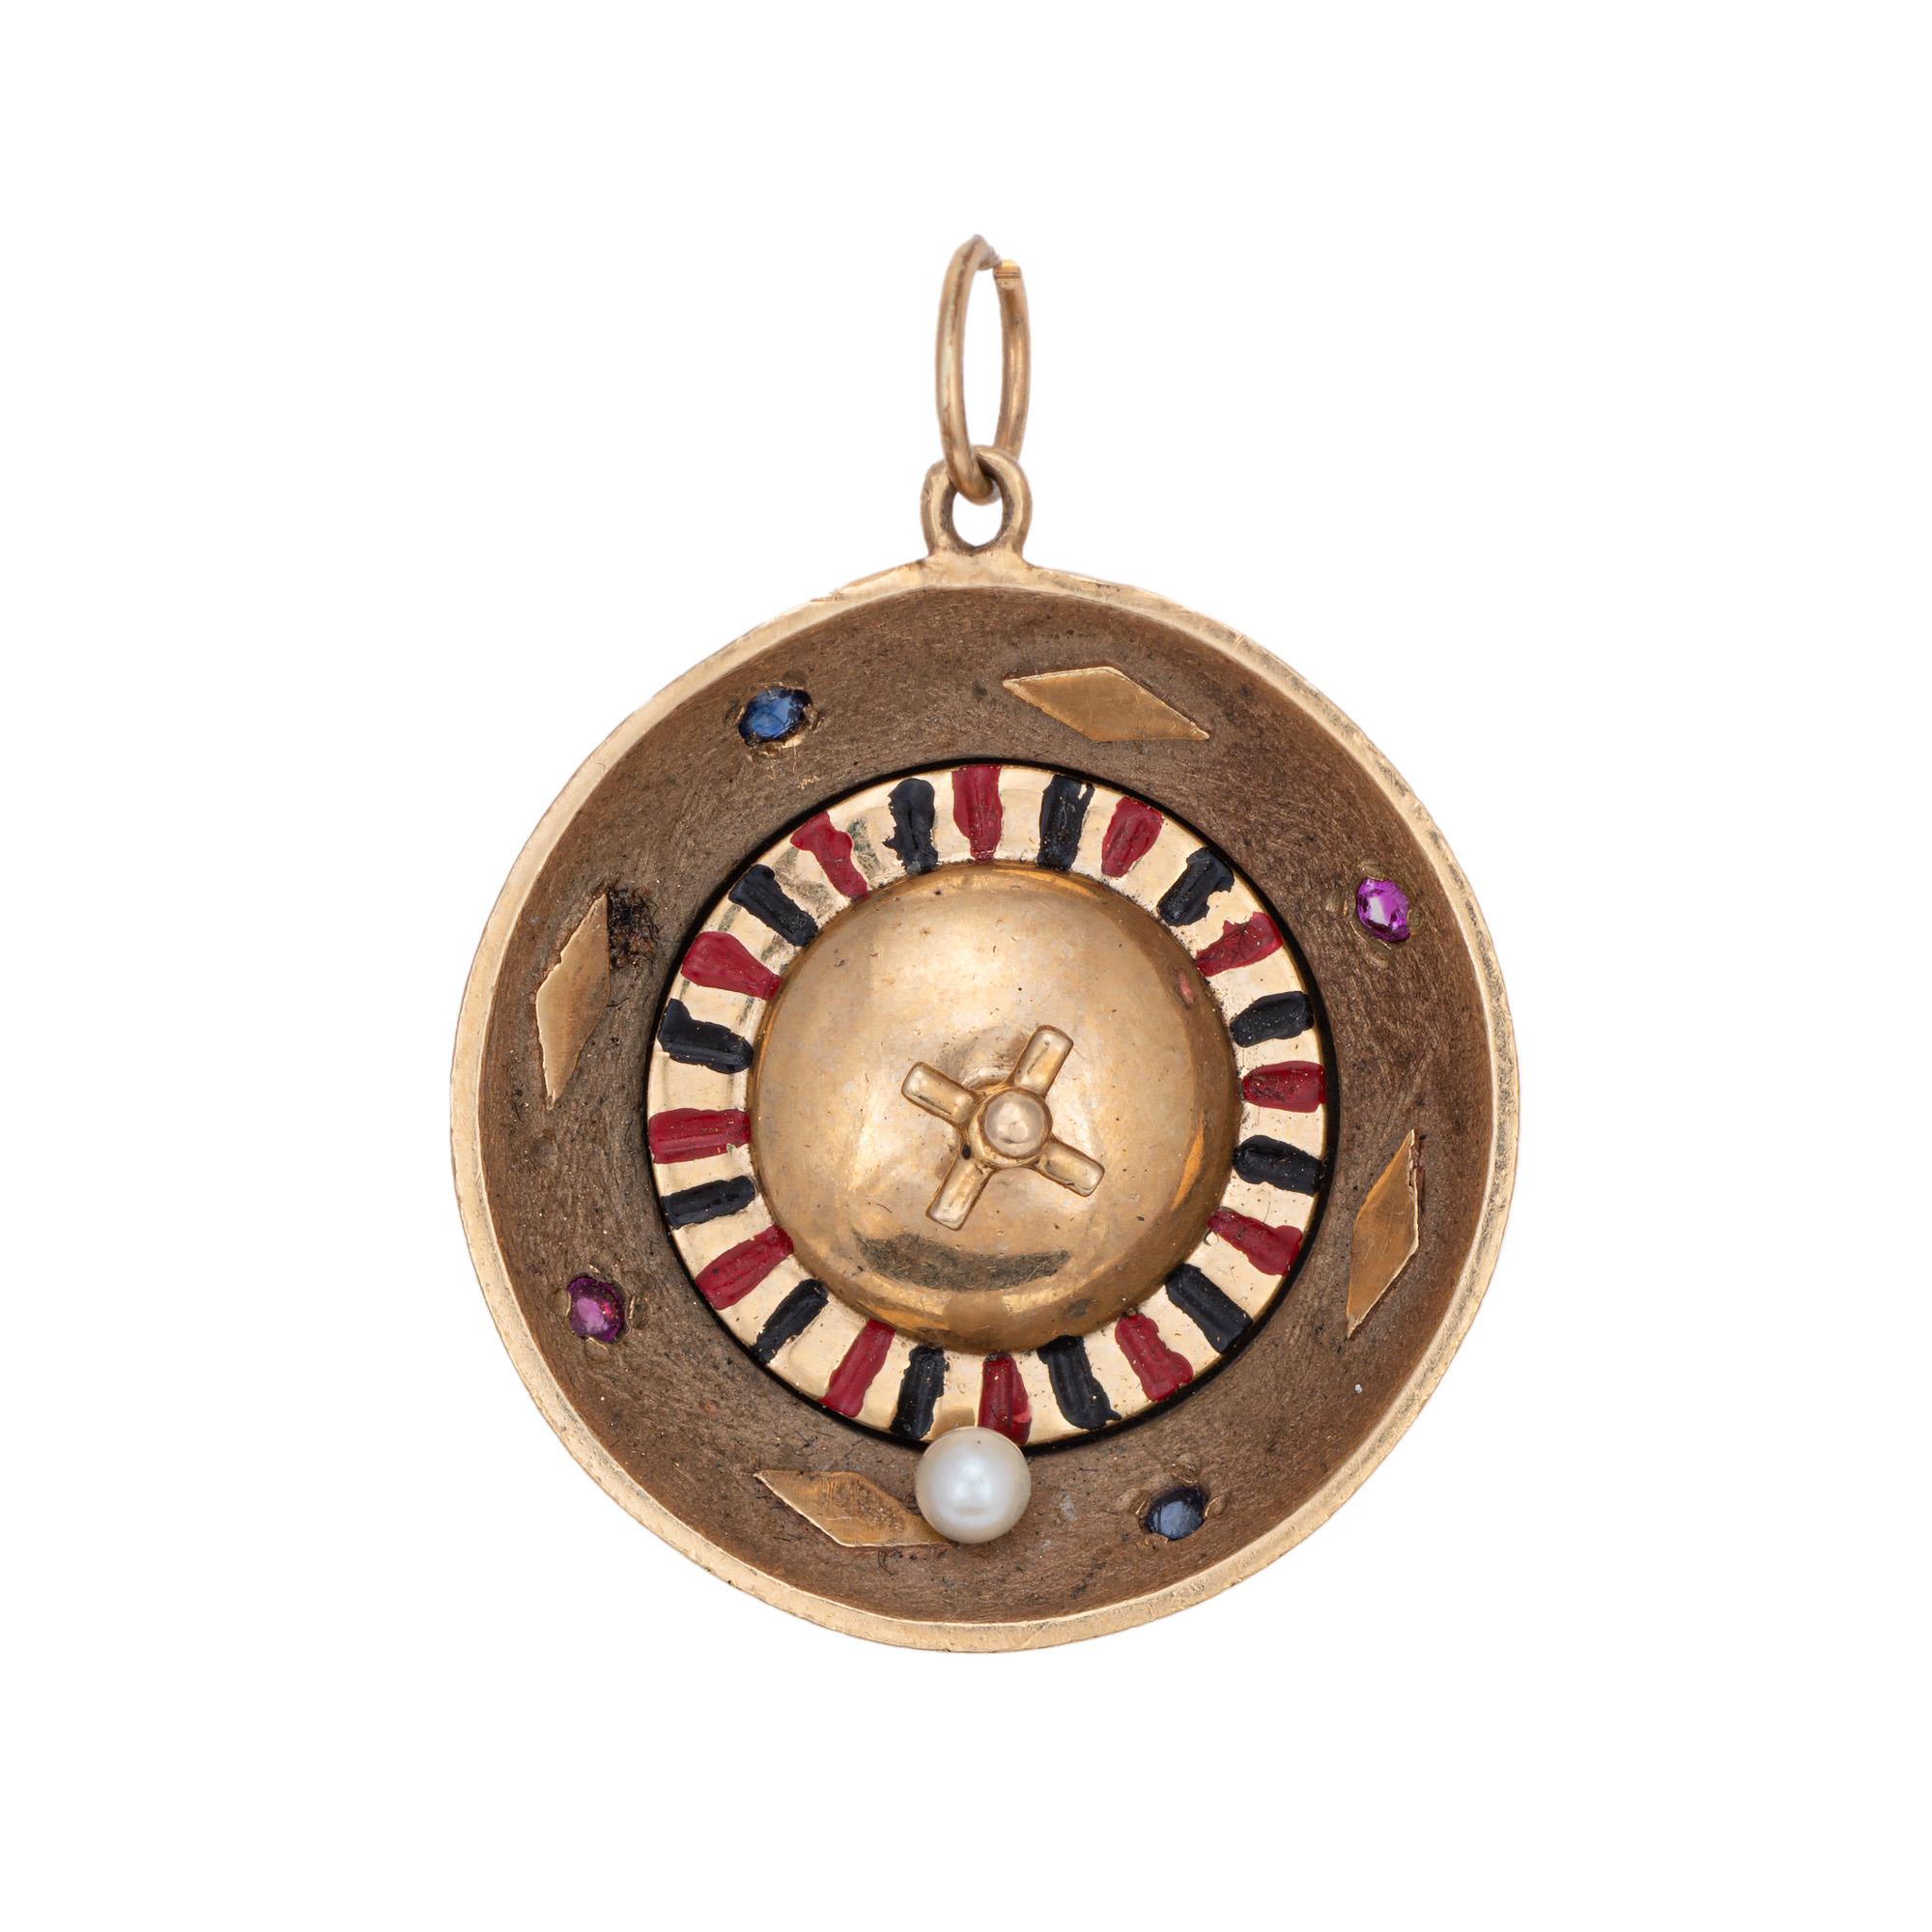 Finely detailed vintage gemstone set roulette wheel charm crafted in 14k yellow gold (circa 1960s to 1970s) 

Two 1mm rubies and two 1mm blue sapphires are set into the charm. One 3mm cultured pearl adorns the base. 
The roulette wheel moves in 360